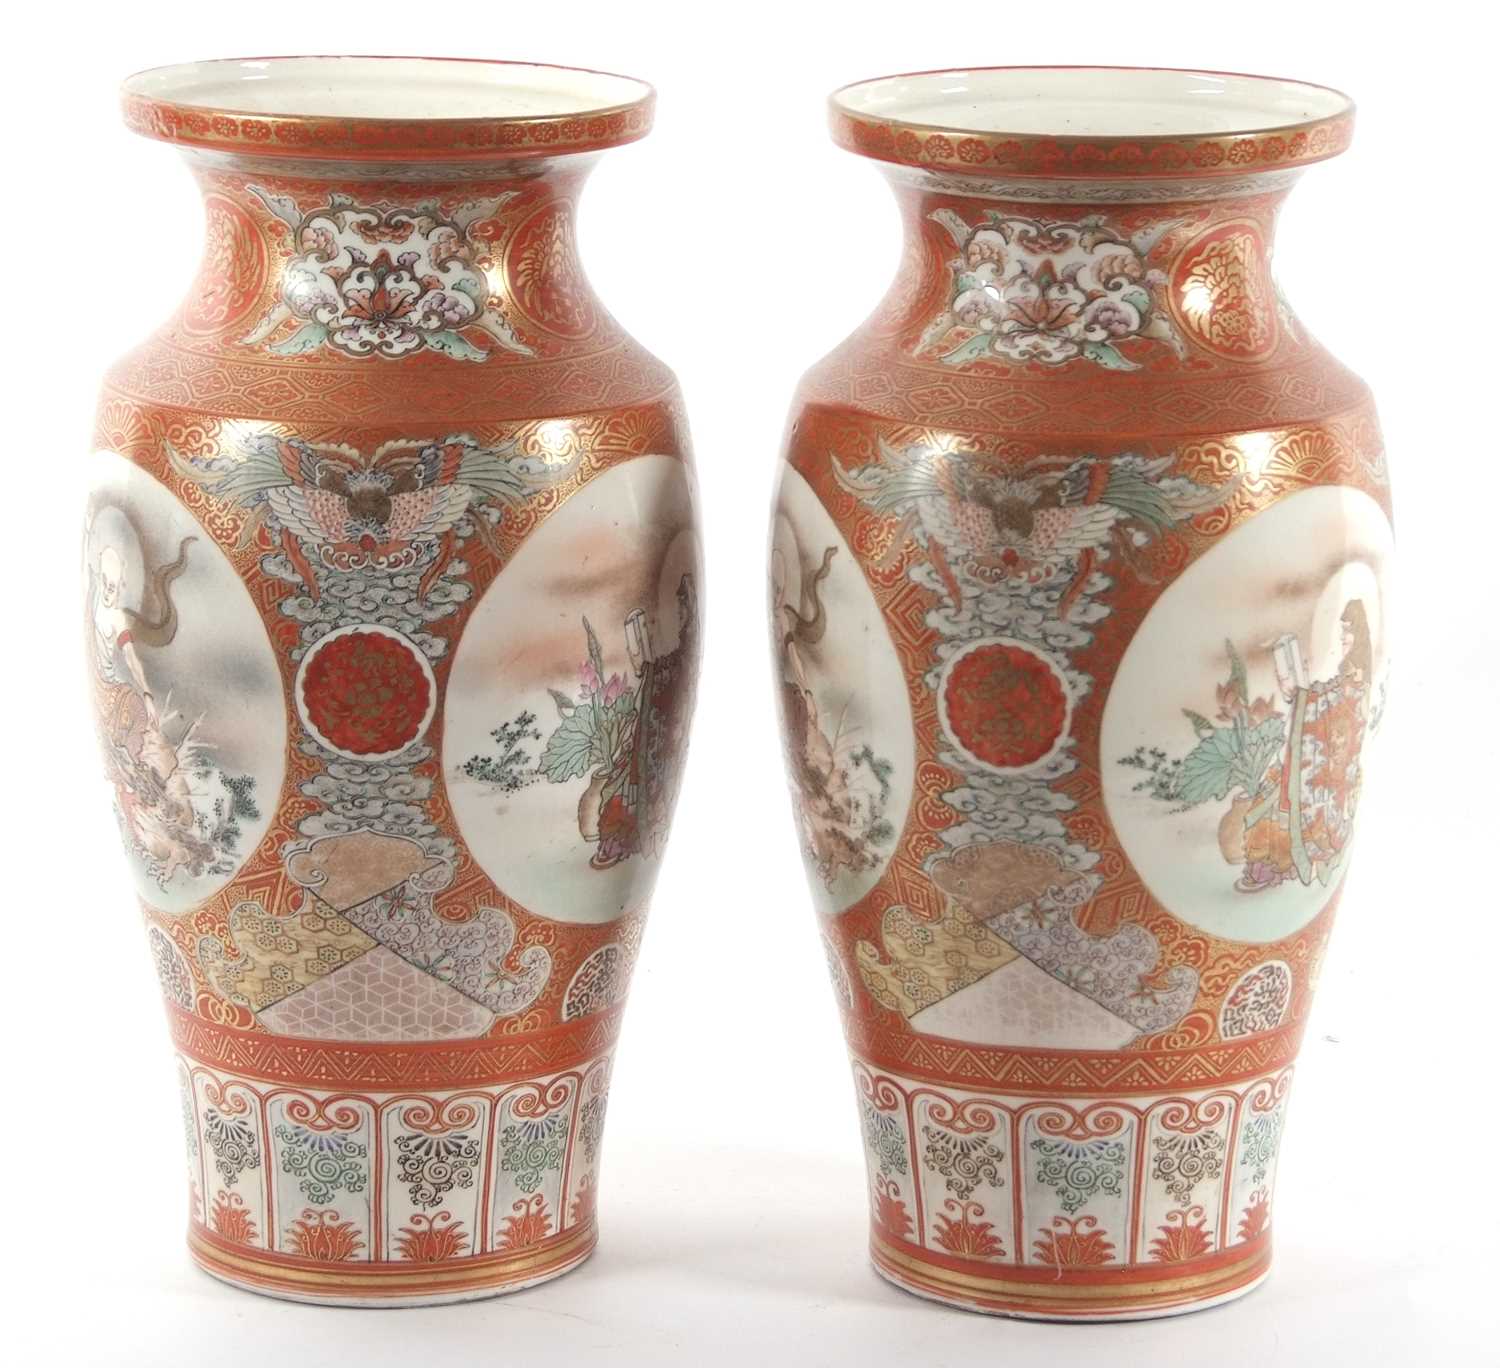 Large pair of Japanese porcelain vases Meiji period decorated with central panels of Japanese - Image 3 of 5